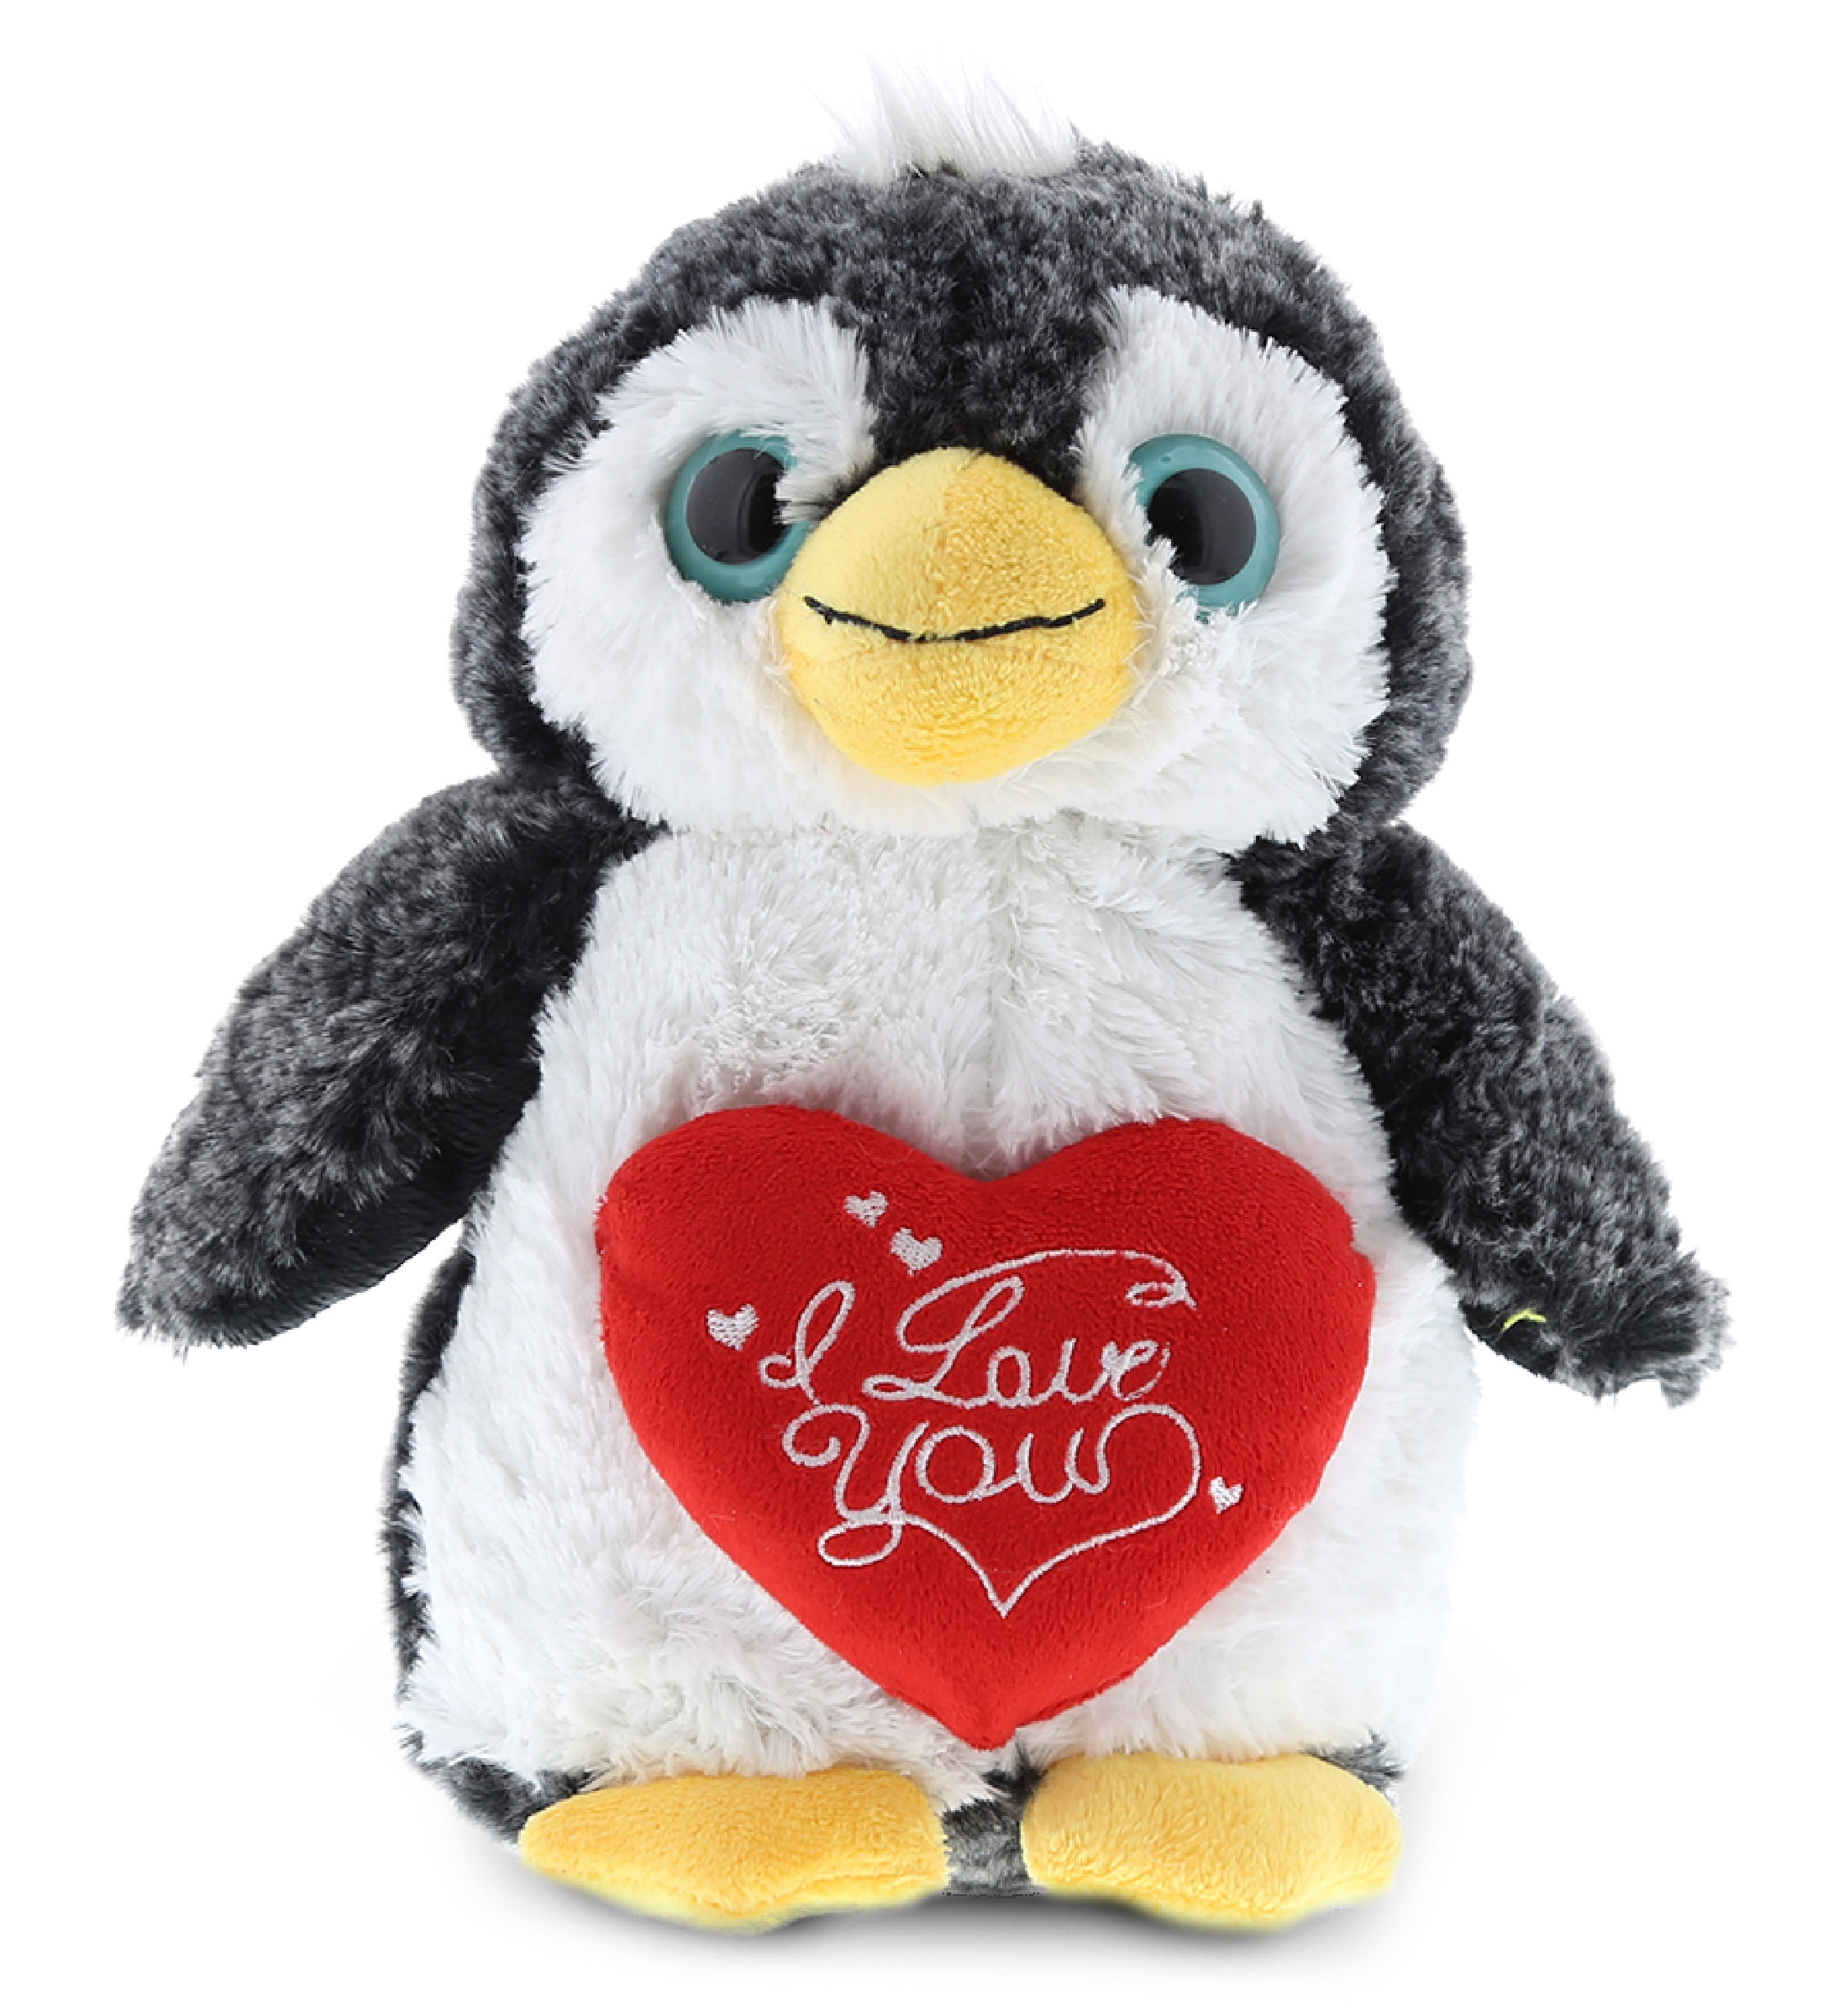 Plushies Penguin Stuffed Animal Toys Blue,9.8in/25cm Soft Penguin Stuff Plush Doll Gift for Kids Girls Boys Girlfriend Valentines Day Gifts Throw Pillow 